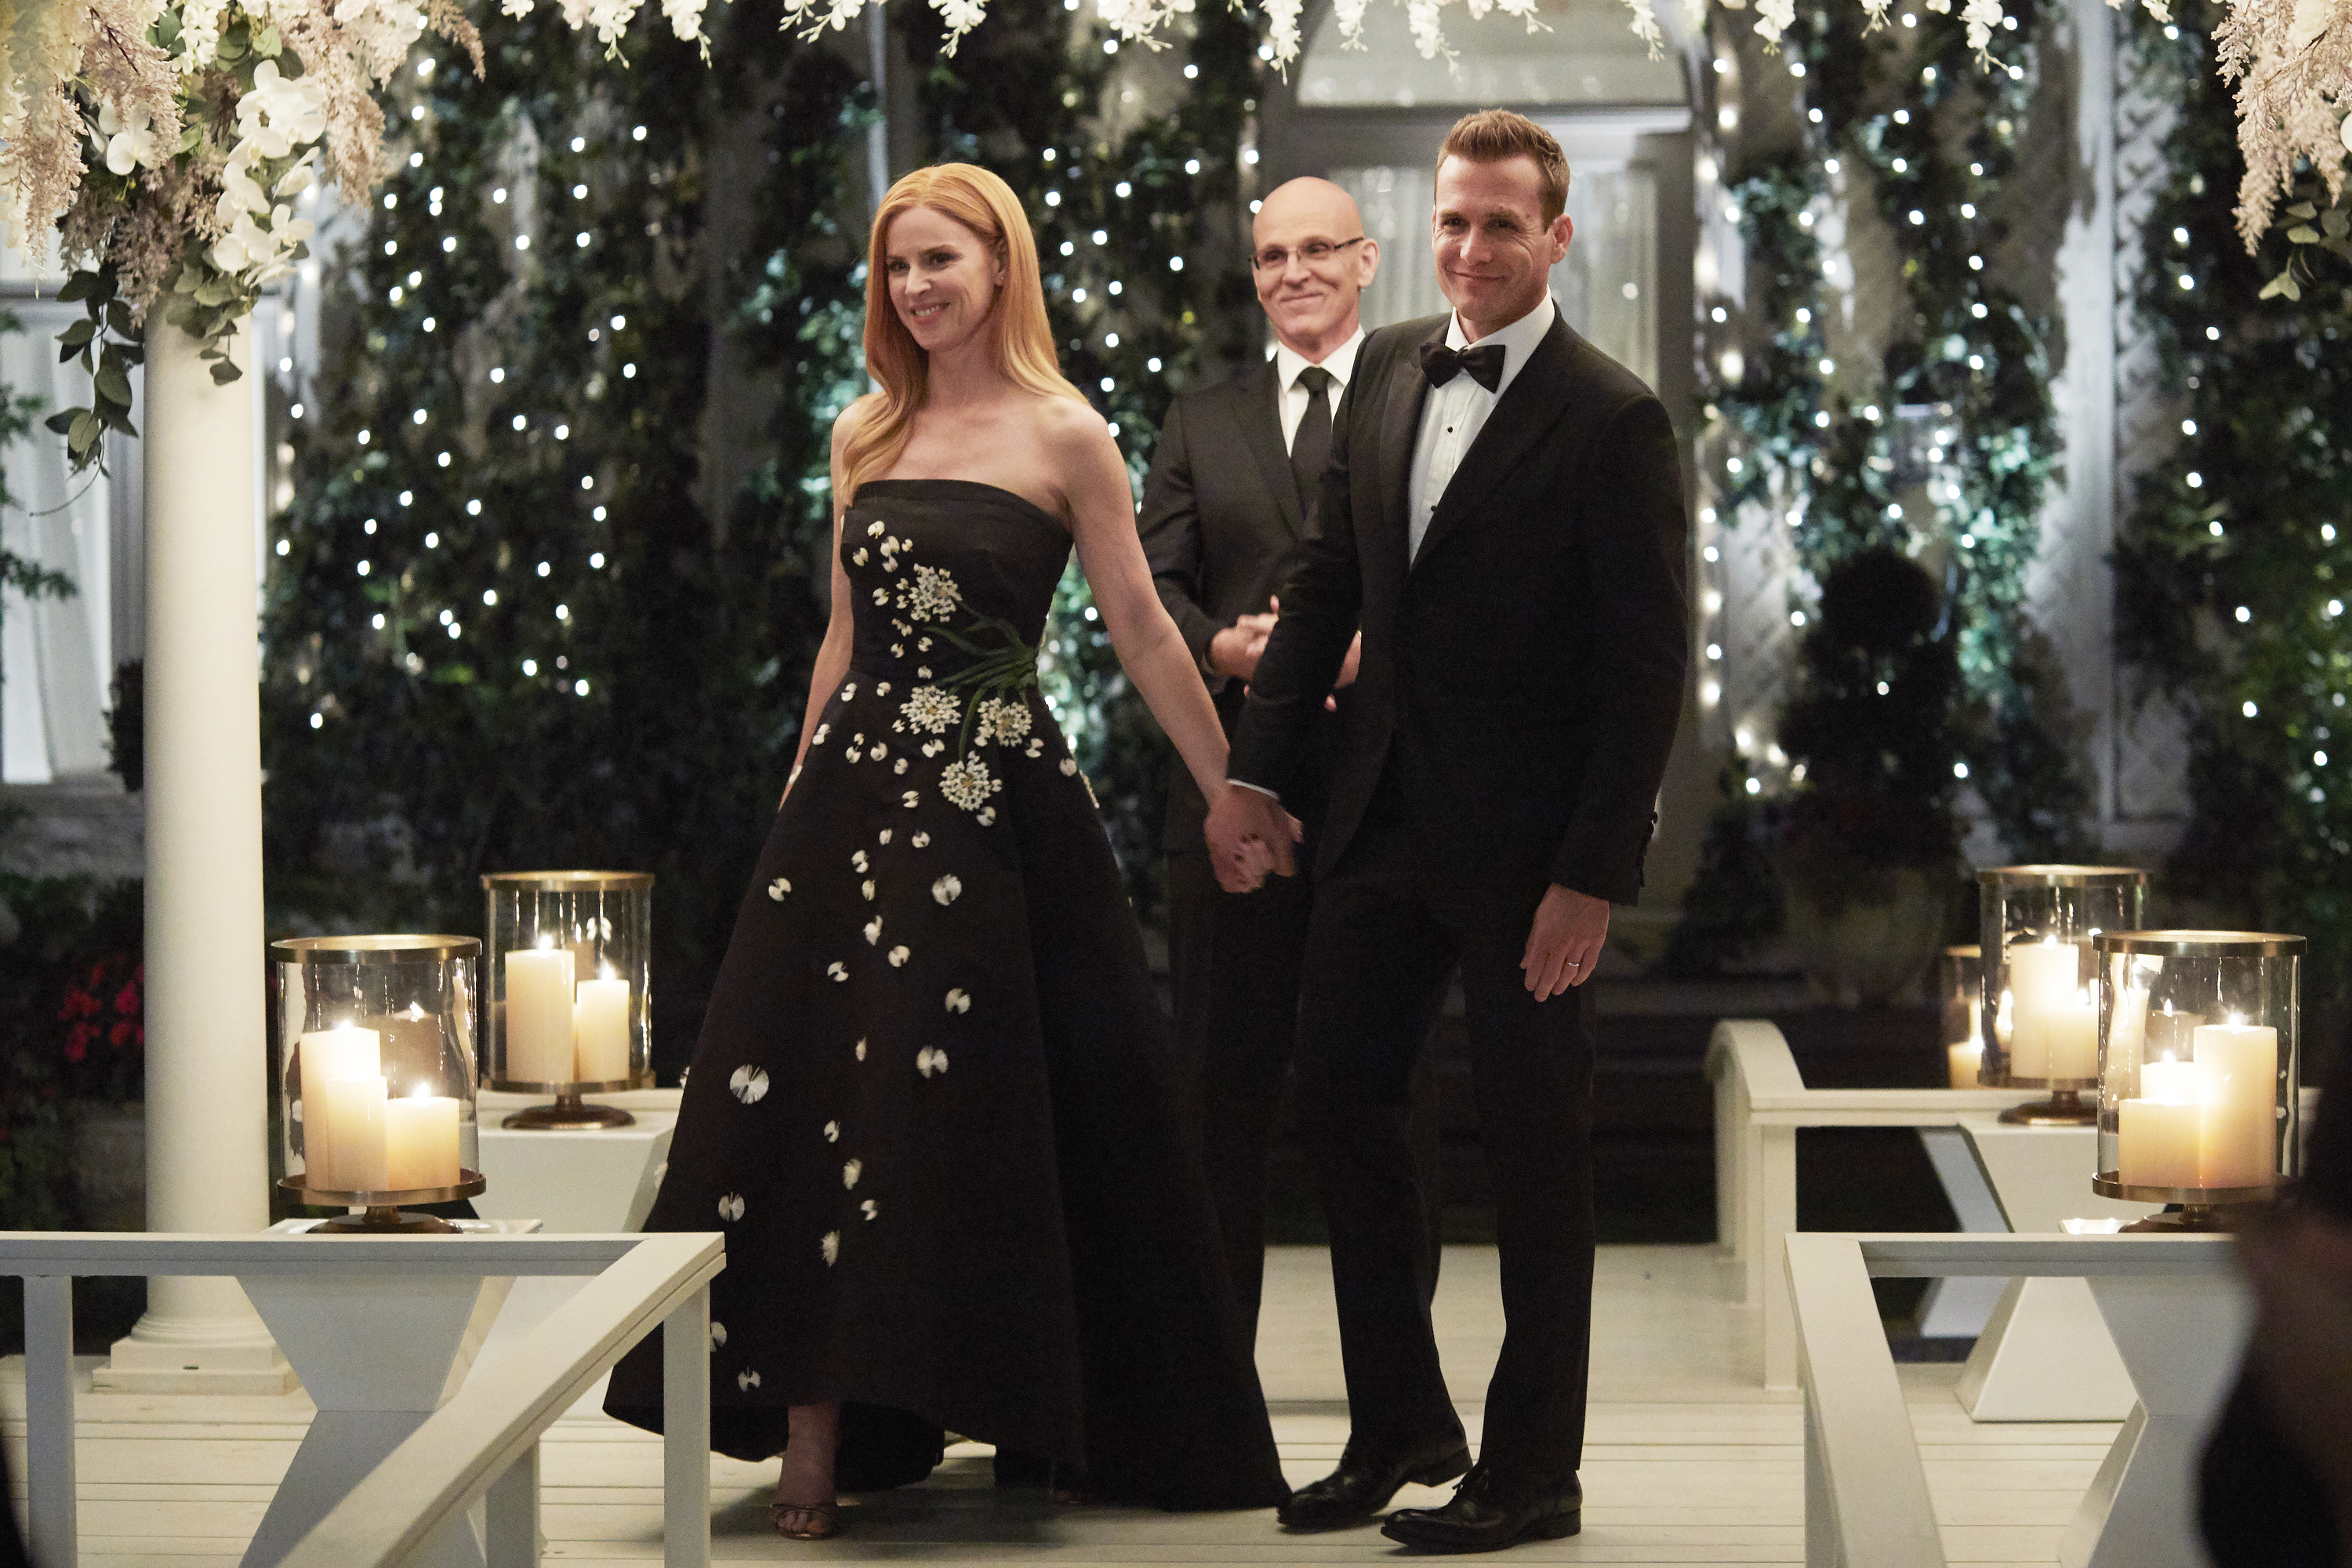 "Suits" final episode, "One Last Con" Episode 910. Sarah Rafferty as Donna Paulsen, Ray Proscia as Dr. Stan Lipschitz, and Gabriel Macht as Harvey Specter on August 23, 2019. | Source: Getty Images